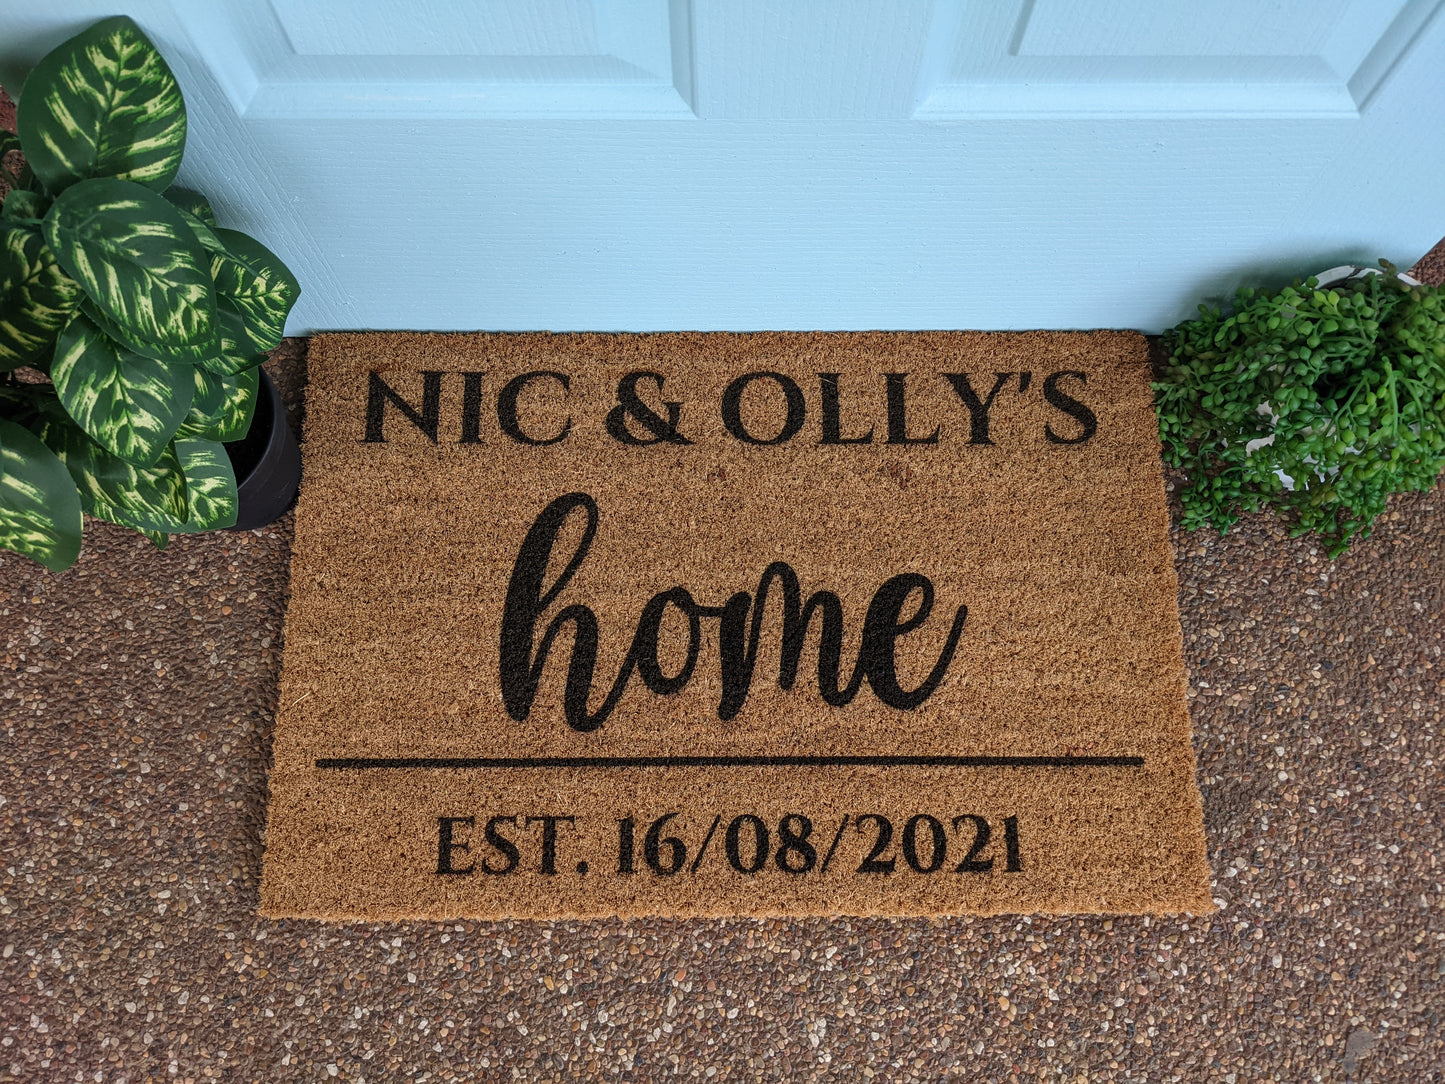 Personalised Home with a date | Personalised Doormat - Personalised Doormat Australia